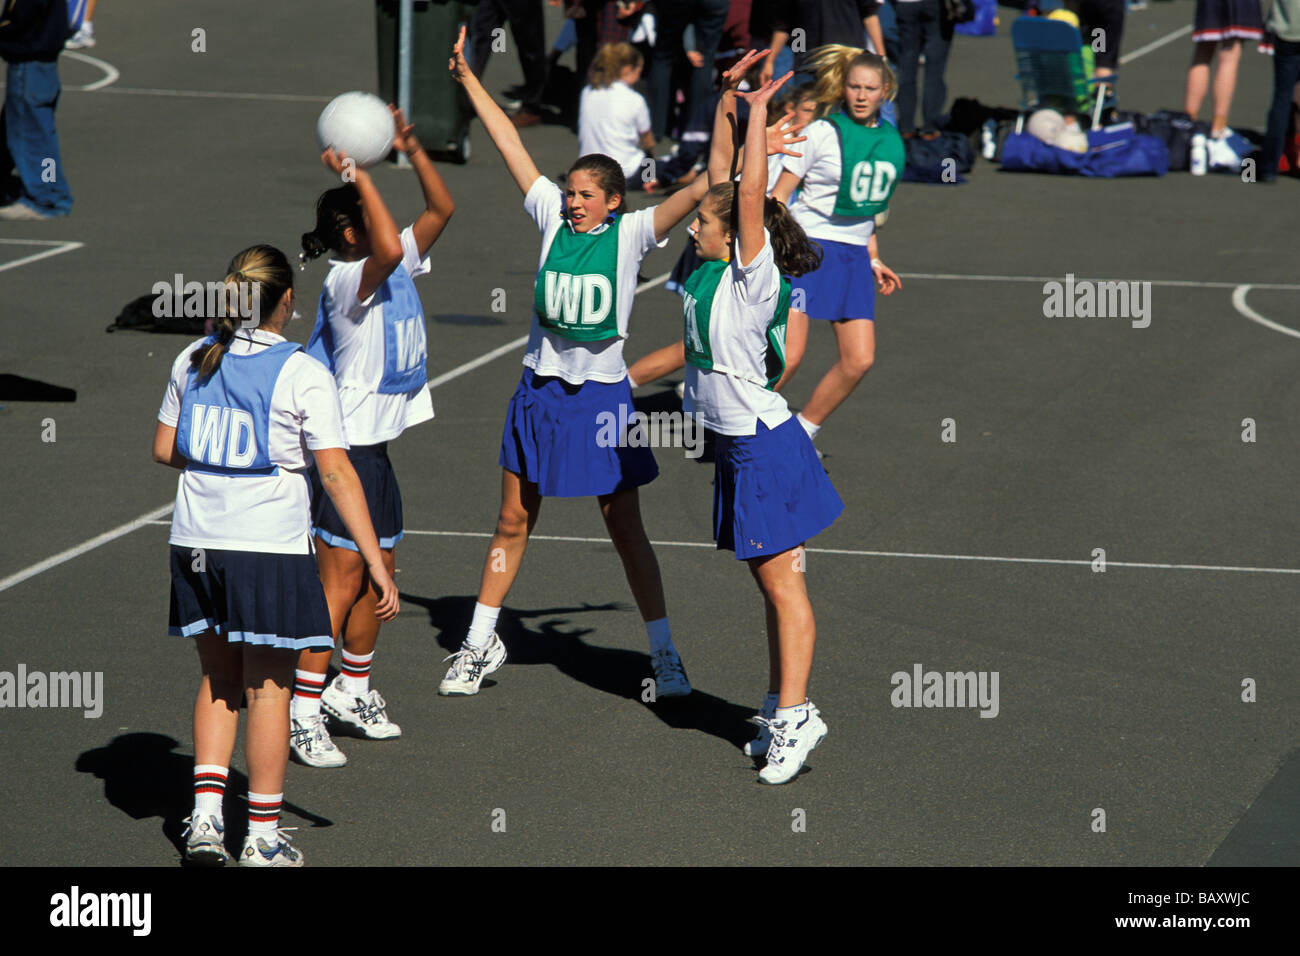 Saturday morning school netball, an Australian weekend tradition, in the North Shore suburb of Willoughby Sydney New South Wales Stock Photo